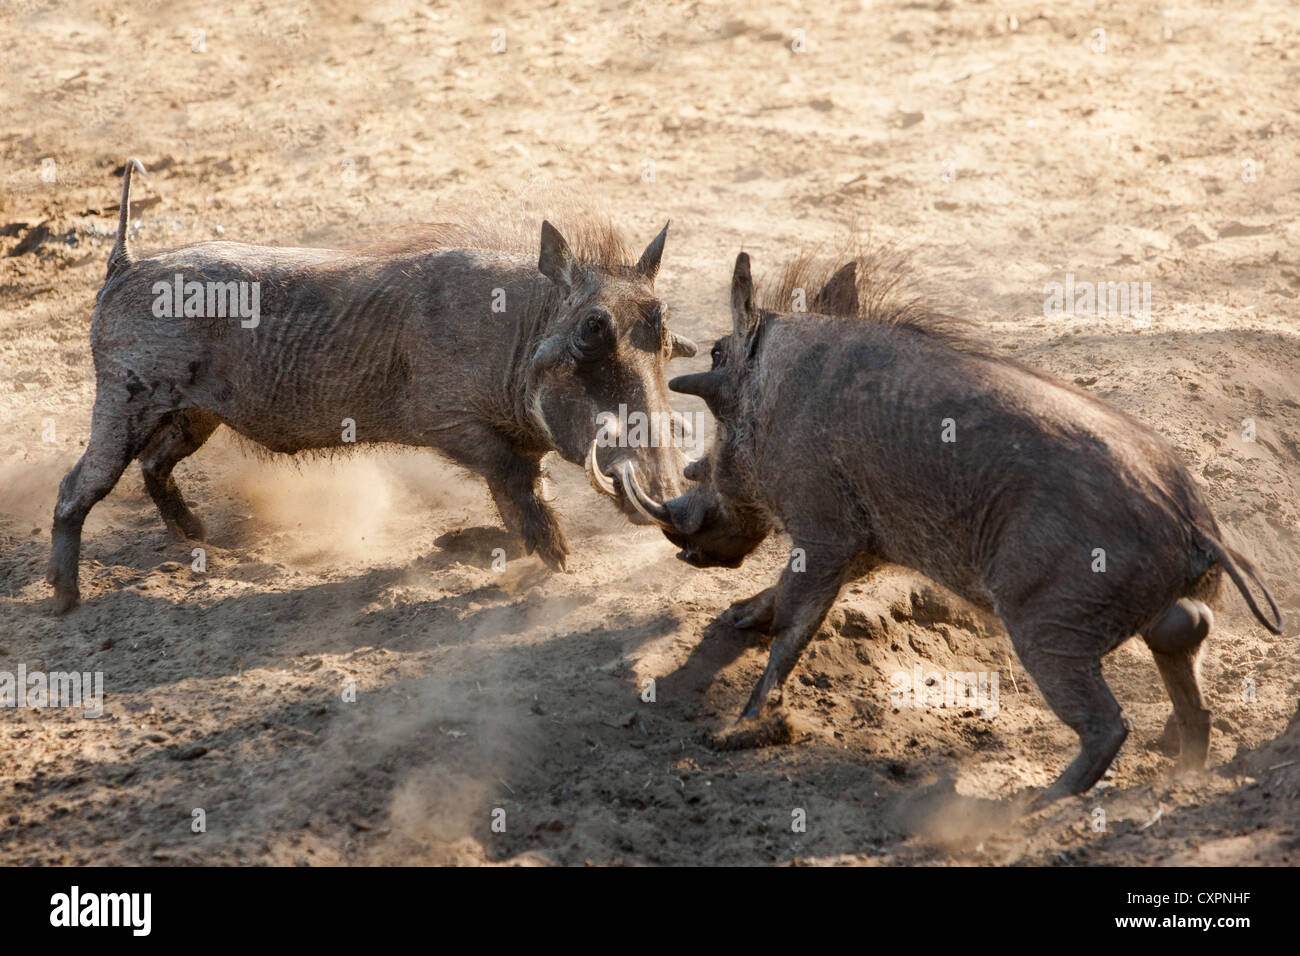 Warthog (Phacochoerus aethiopicus), boars fighting, Mkhuze game reserve, South Africa Stock Photo